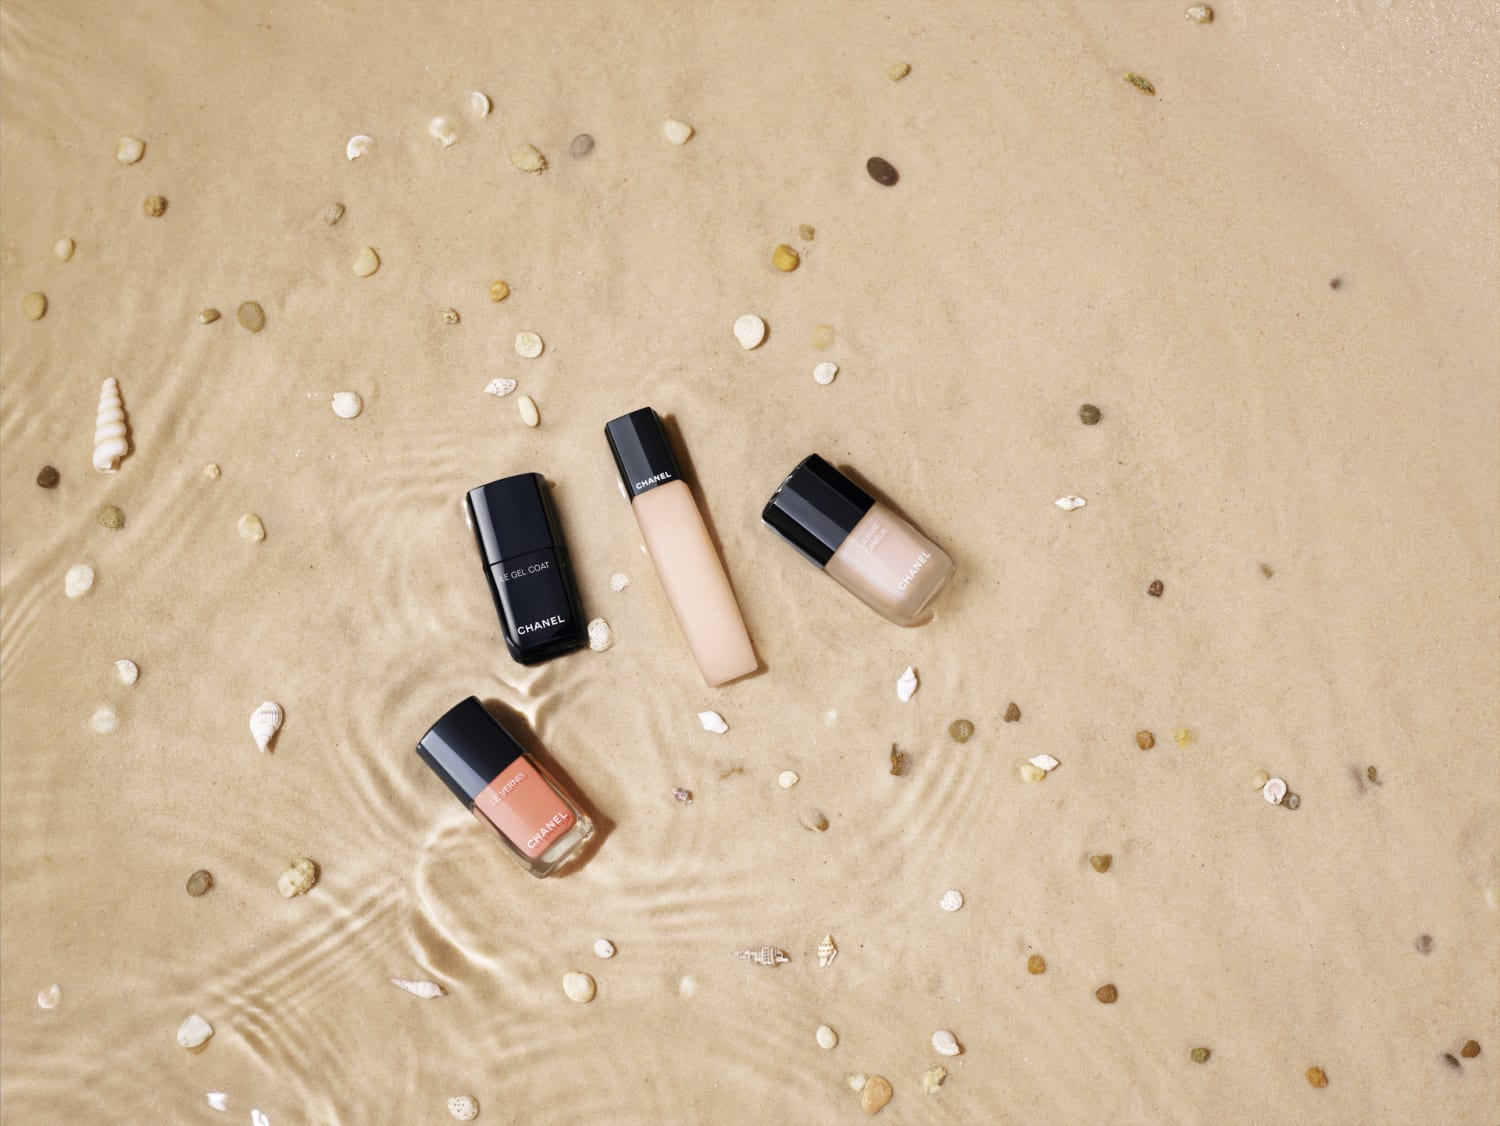 Beauty Pefect: Two New Exciting Products From Chanel